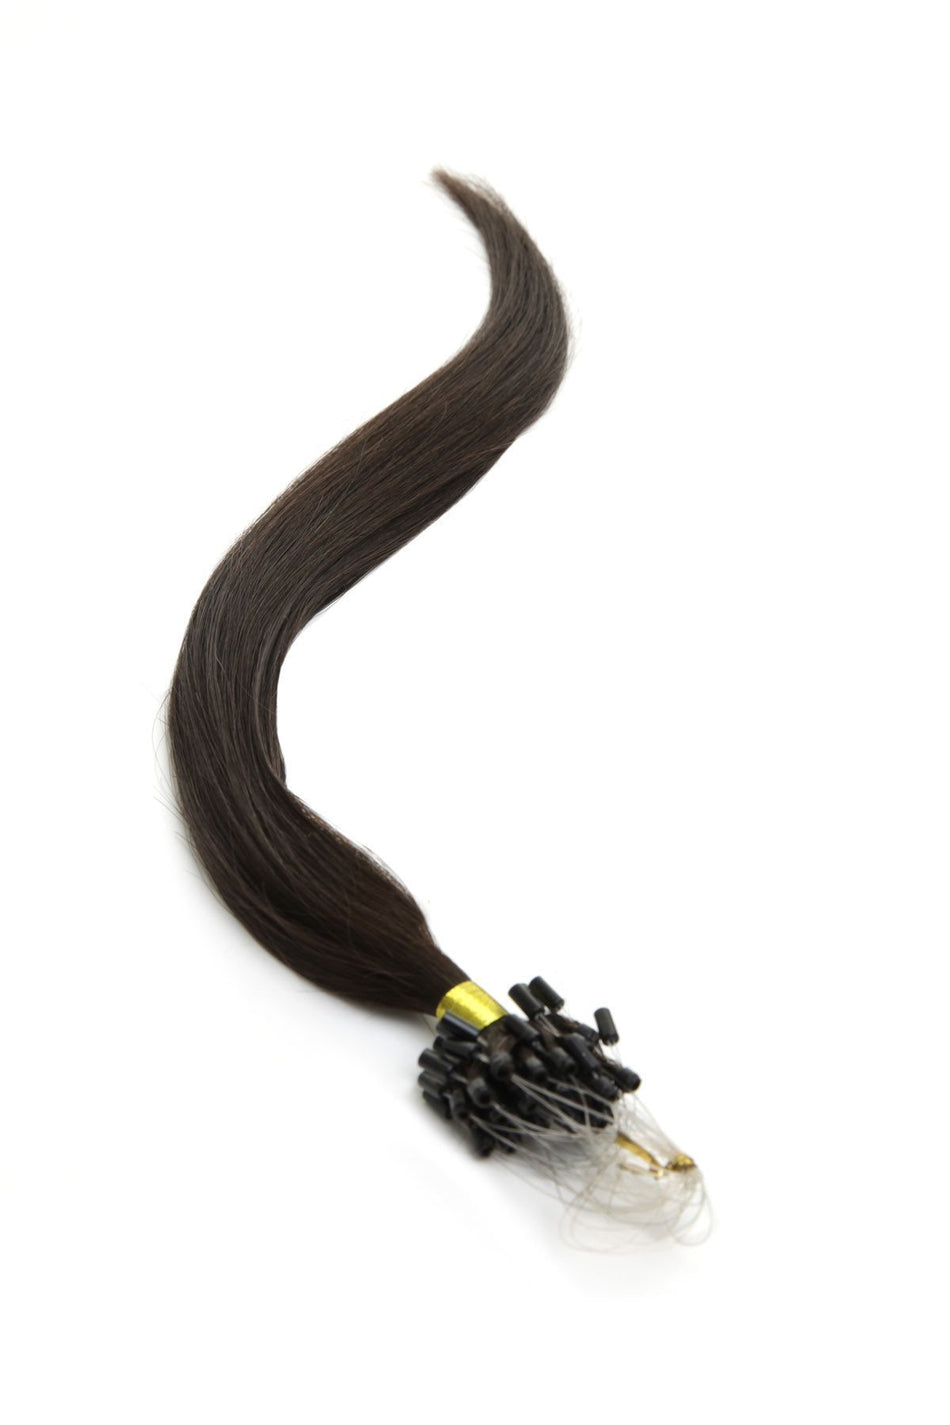 Micro Ring Hair Extensions | 22 inch Barely Black (1b) - beautyhair.co.ukHair Extensions